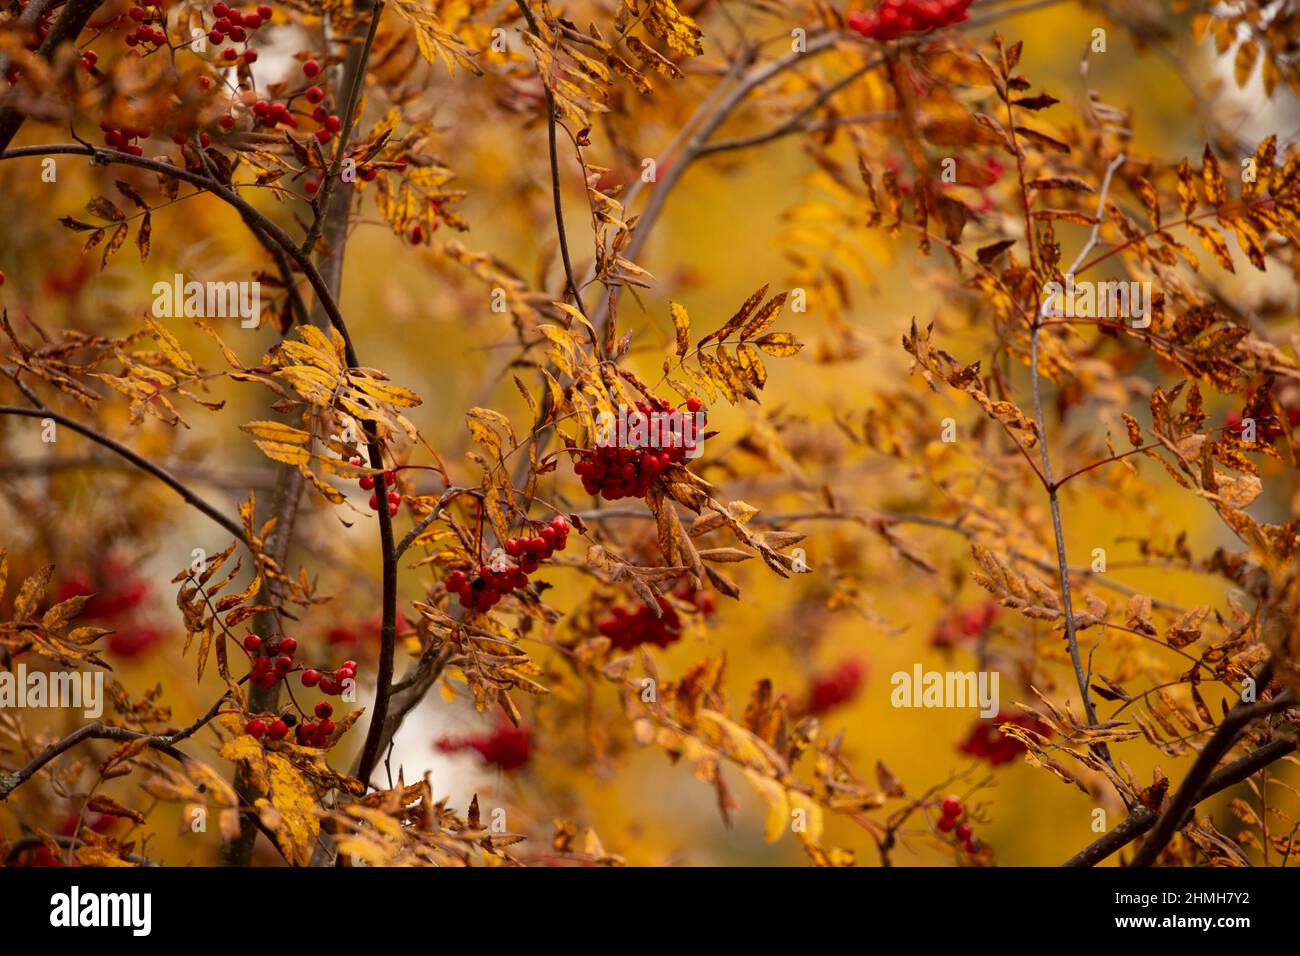 Rowan (Sorbus aucuparia) branches with red berries in October, Stock Photo